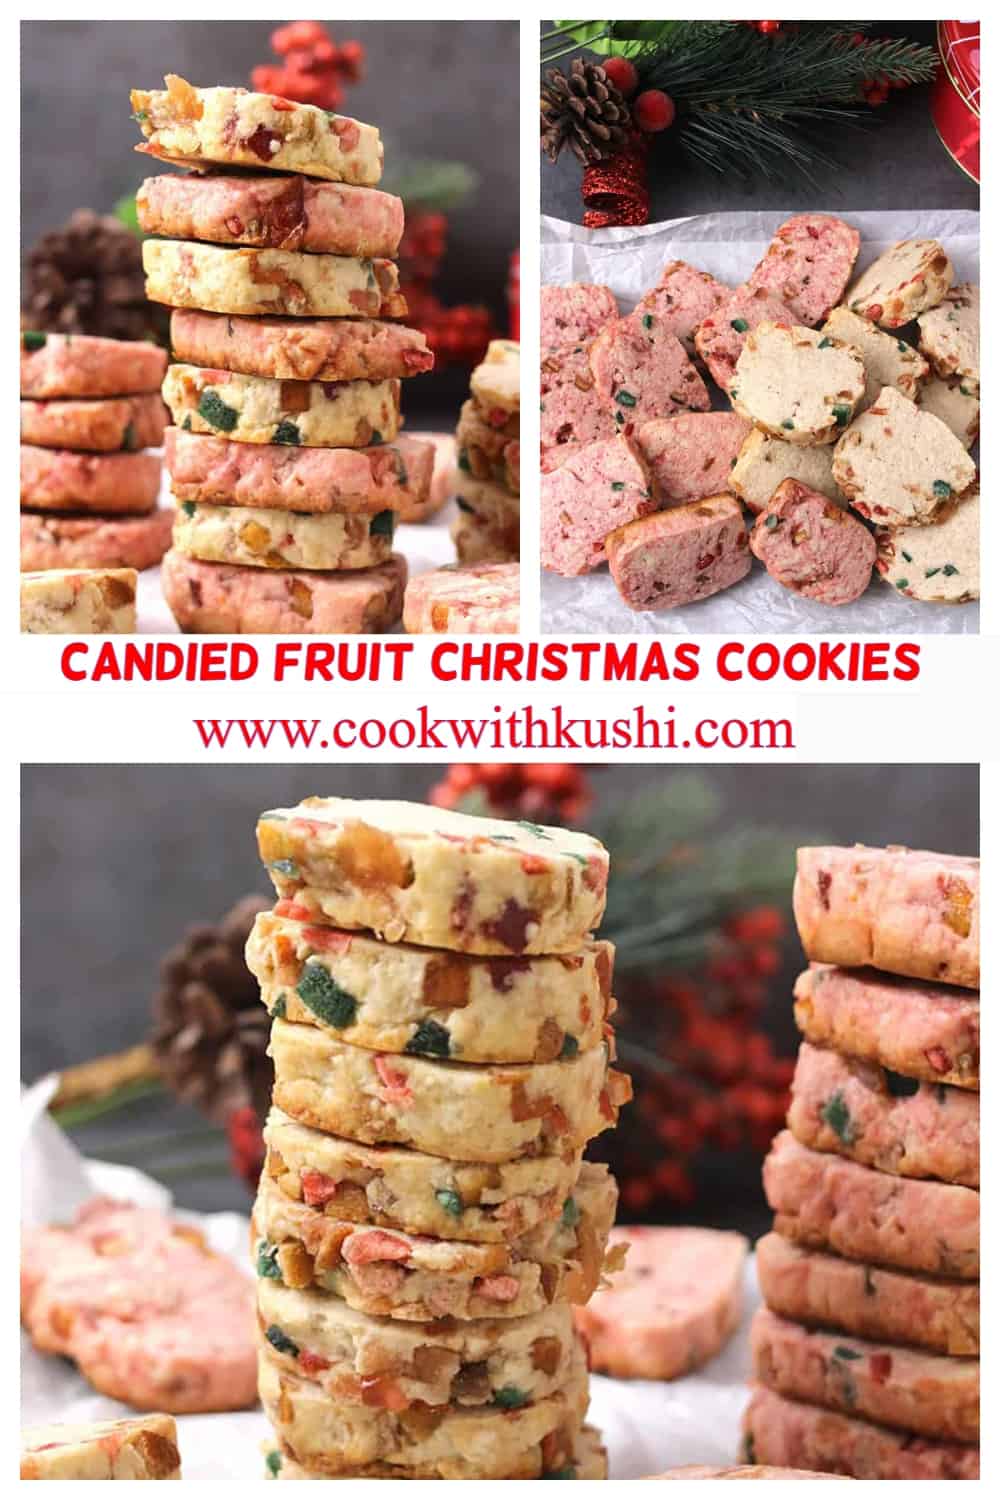 best christmas cookies with candied fruit, karachi biscuits, tutti frutti 